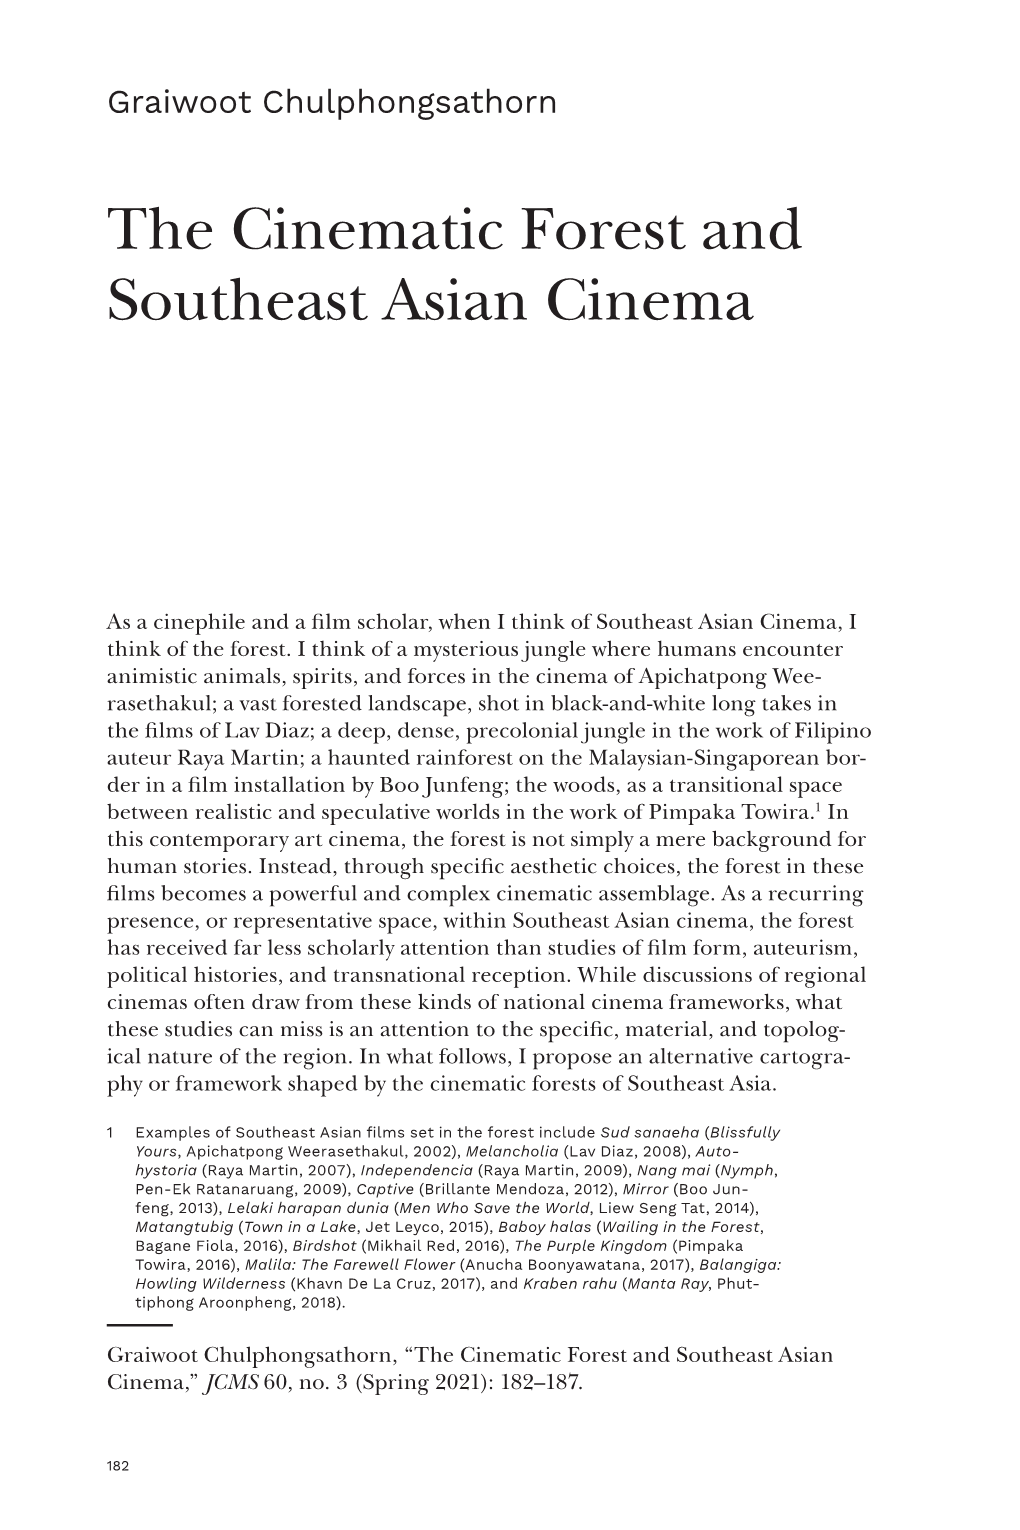 The Cinematic Forest and Southeast Asian Cinema